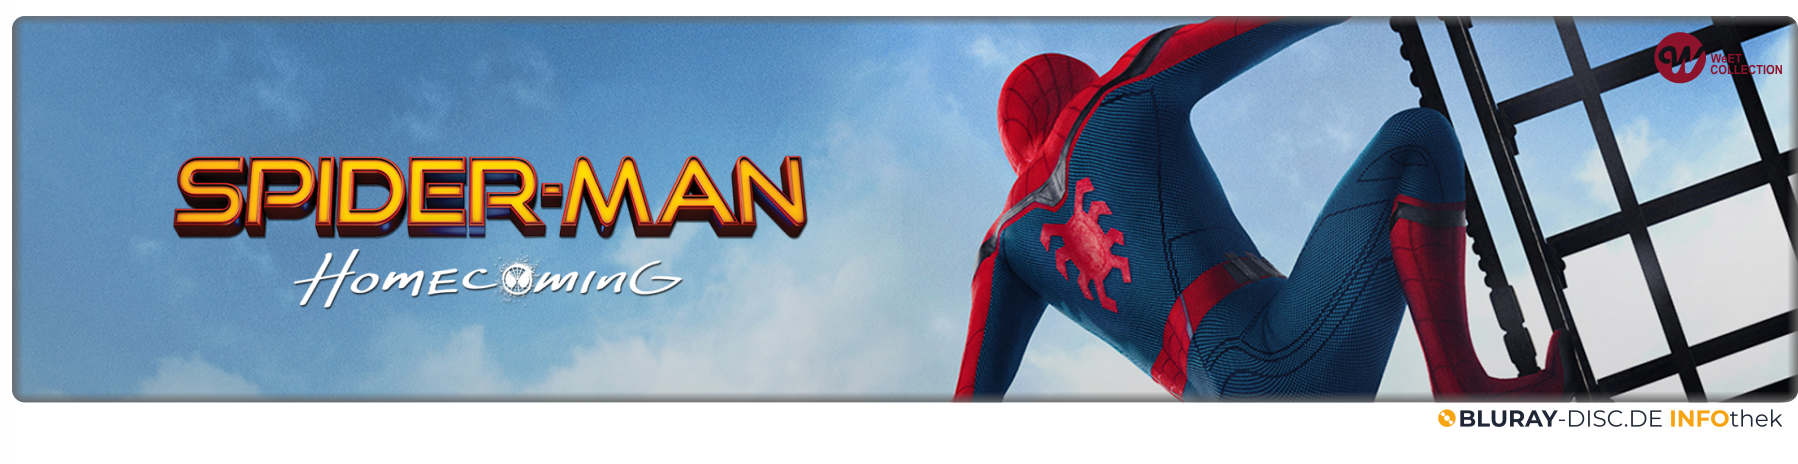 Spider-Man_Homecoming.png